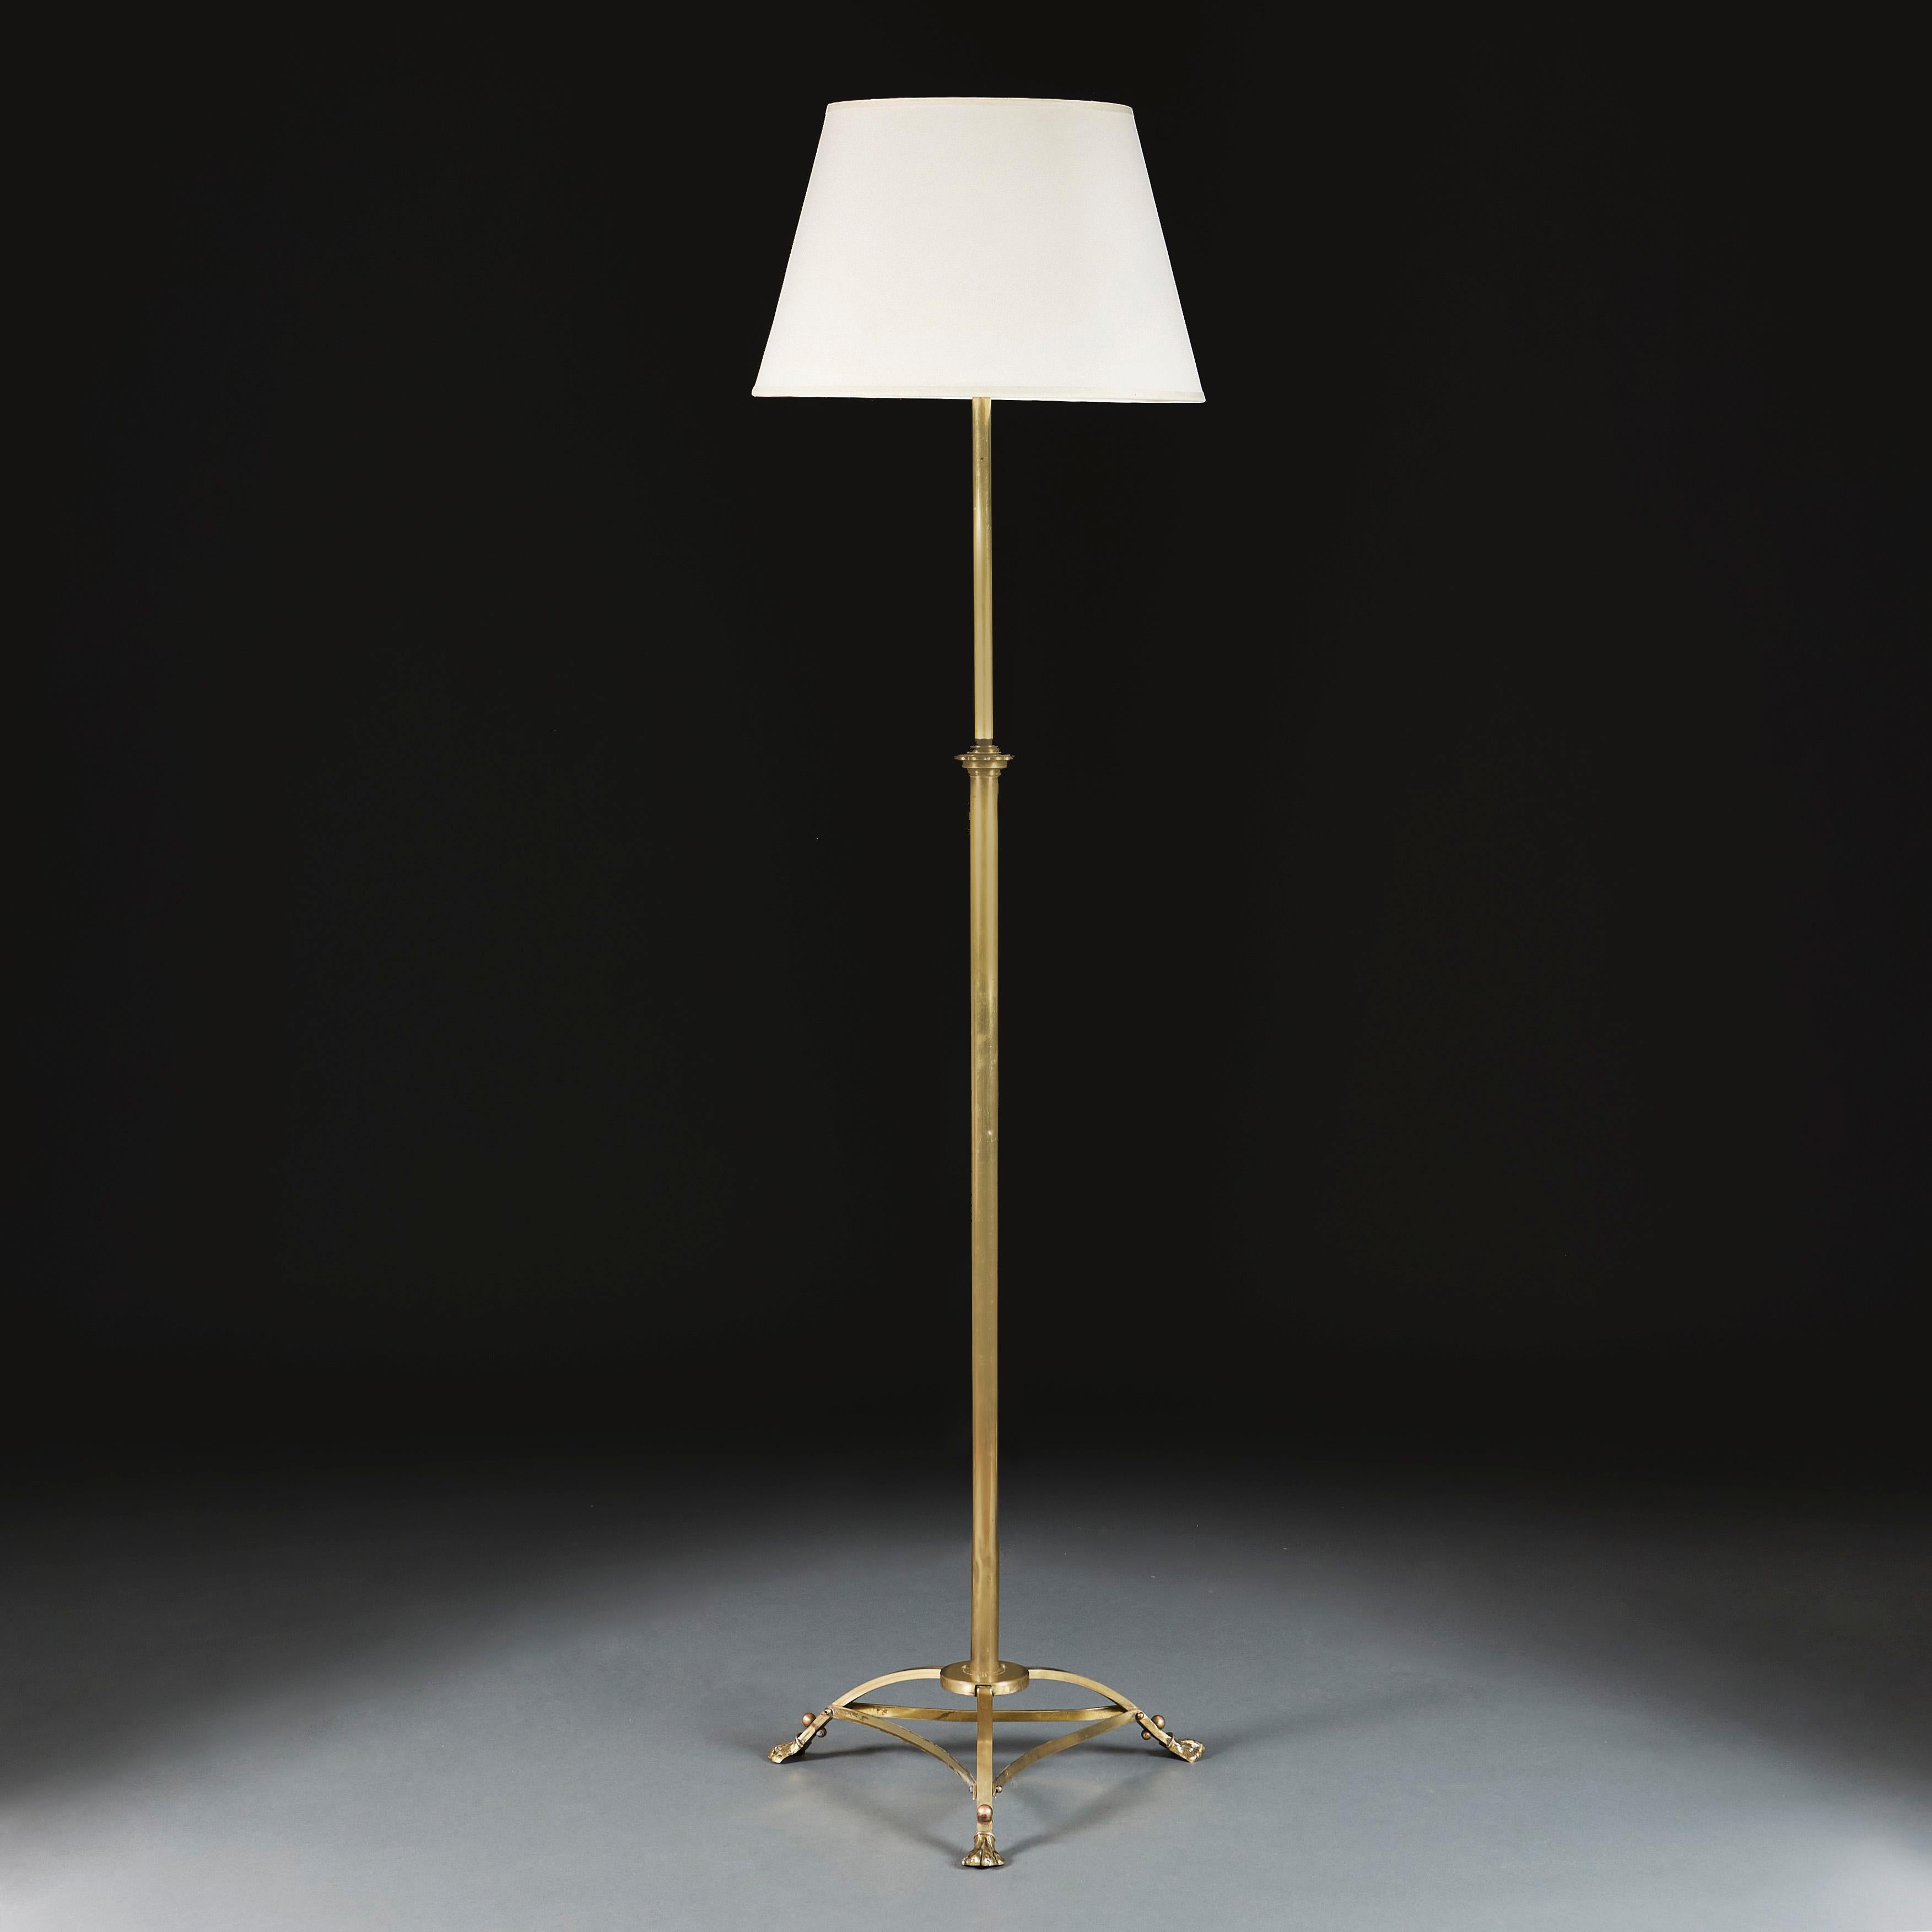 England, circa 1900

An Edwardian brass floor lamp with adjustable stem, supported on a tripod base with brass stretchers and hairy paw feet.

Height 148.00cm
Height with shade 180.00cm
Width of base 46.00cm.

Please note: This is currently wired